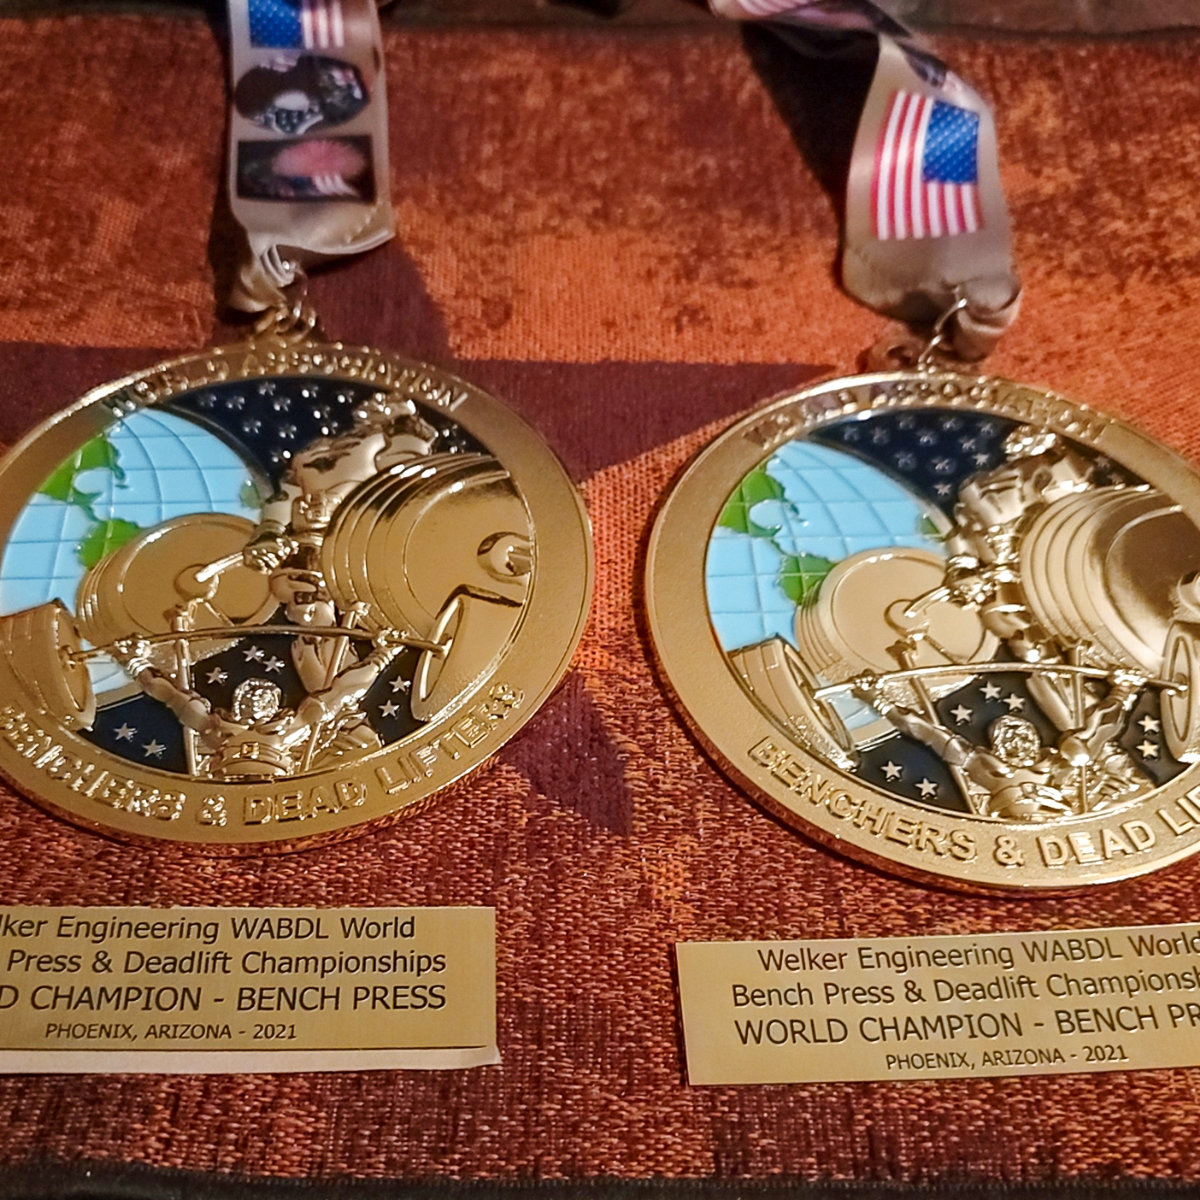 The World Championship medals Ninion Beseda has won are pictured.